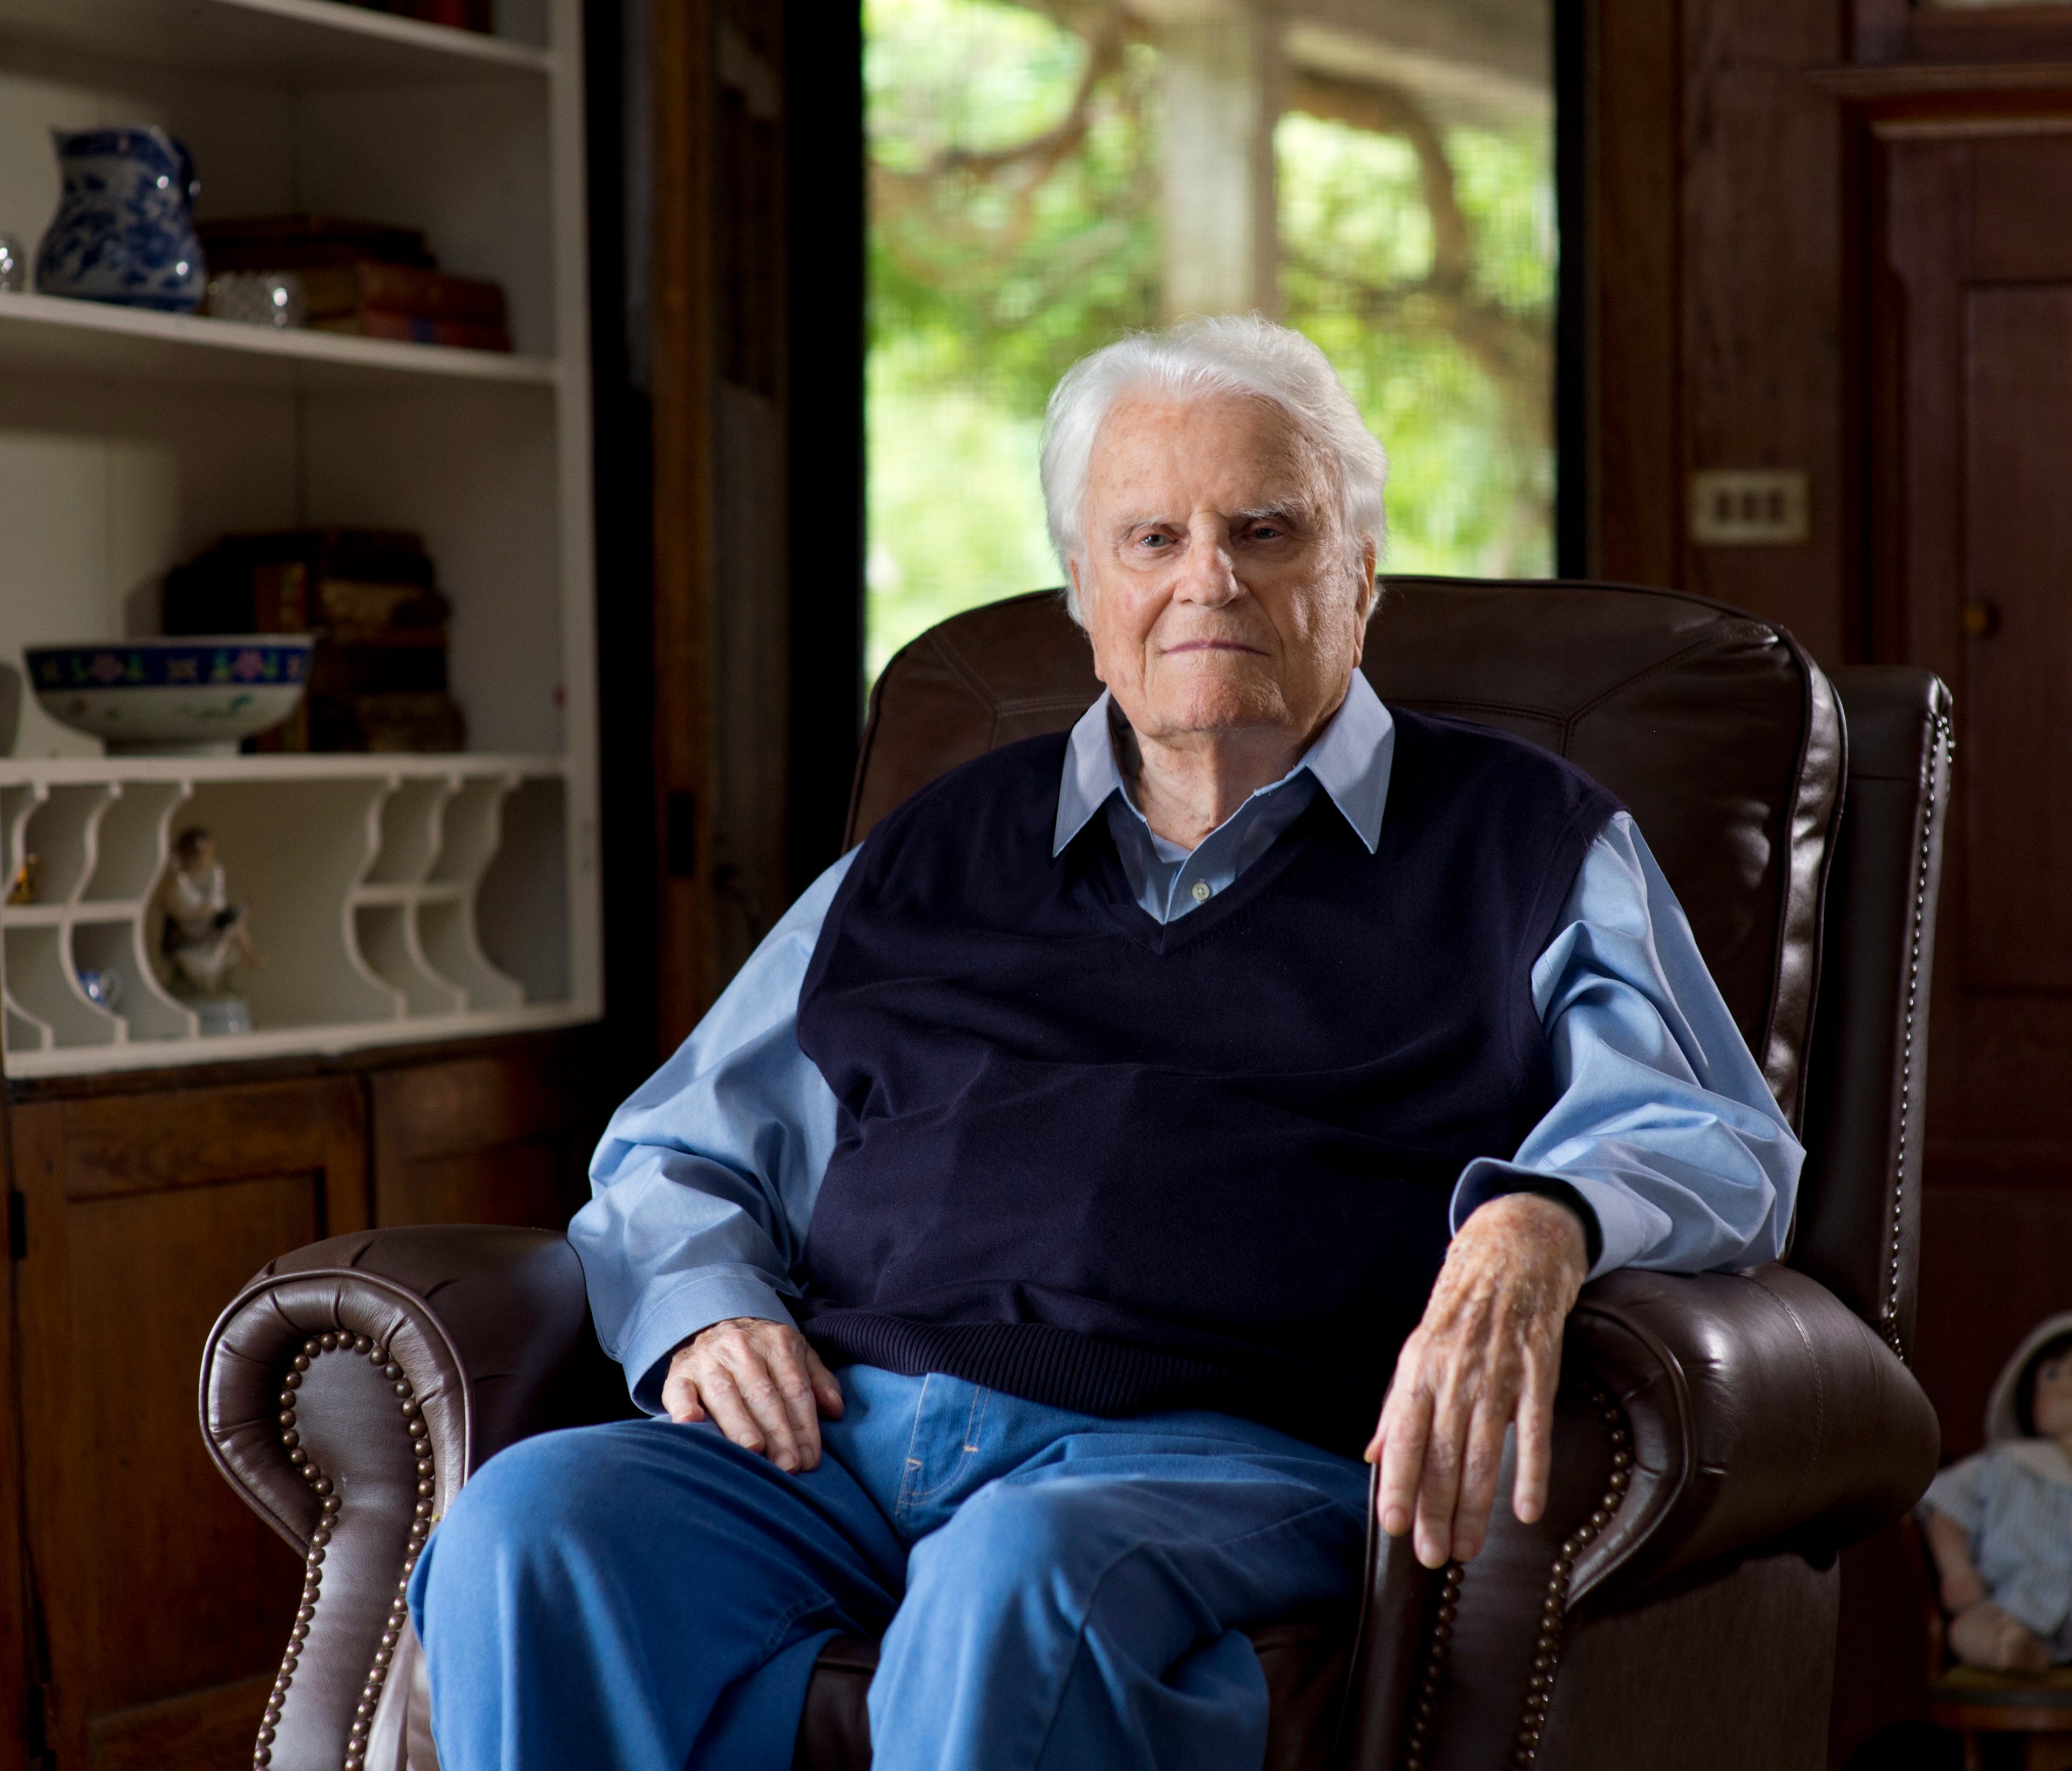 The Rev. Billy Graham's funeral service will take place Friday, March 2 at the Billy Graham Library in Charlotte.